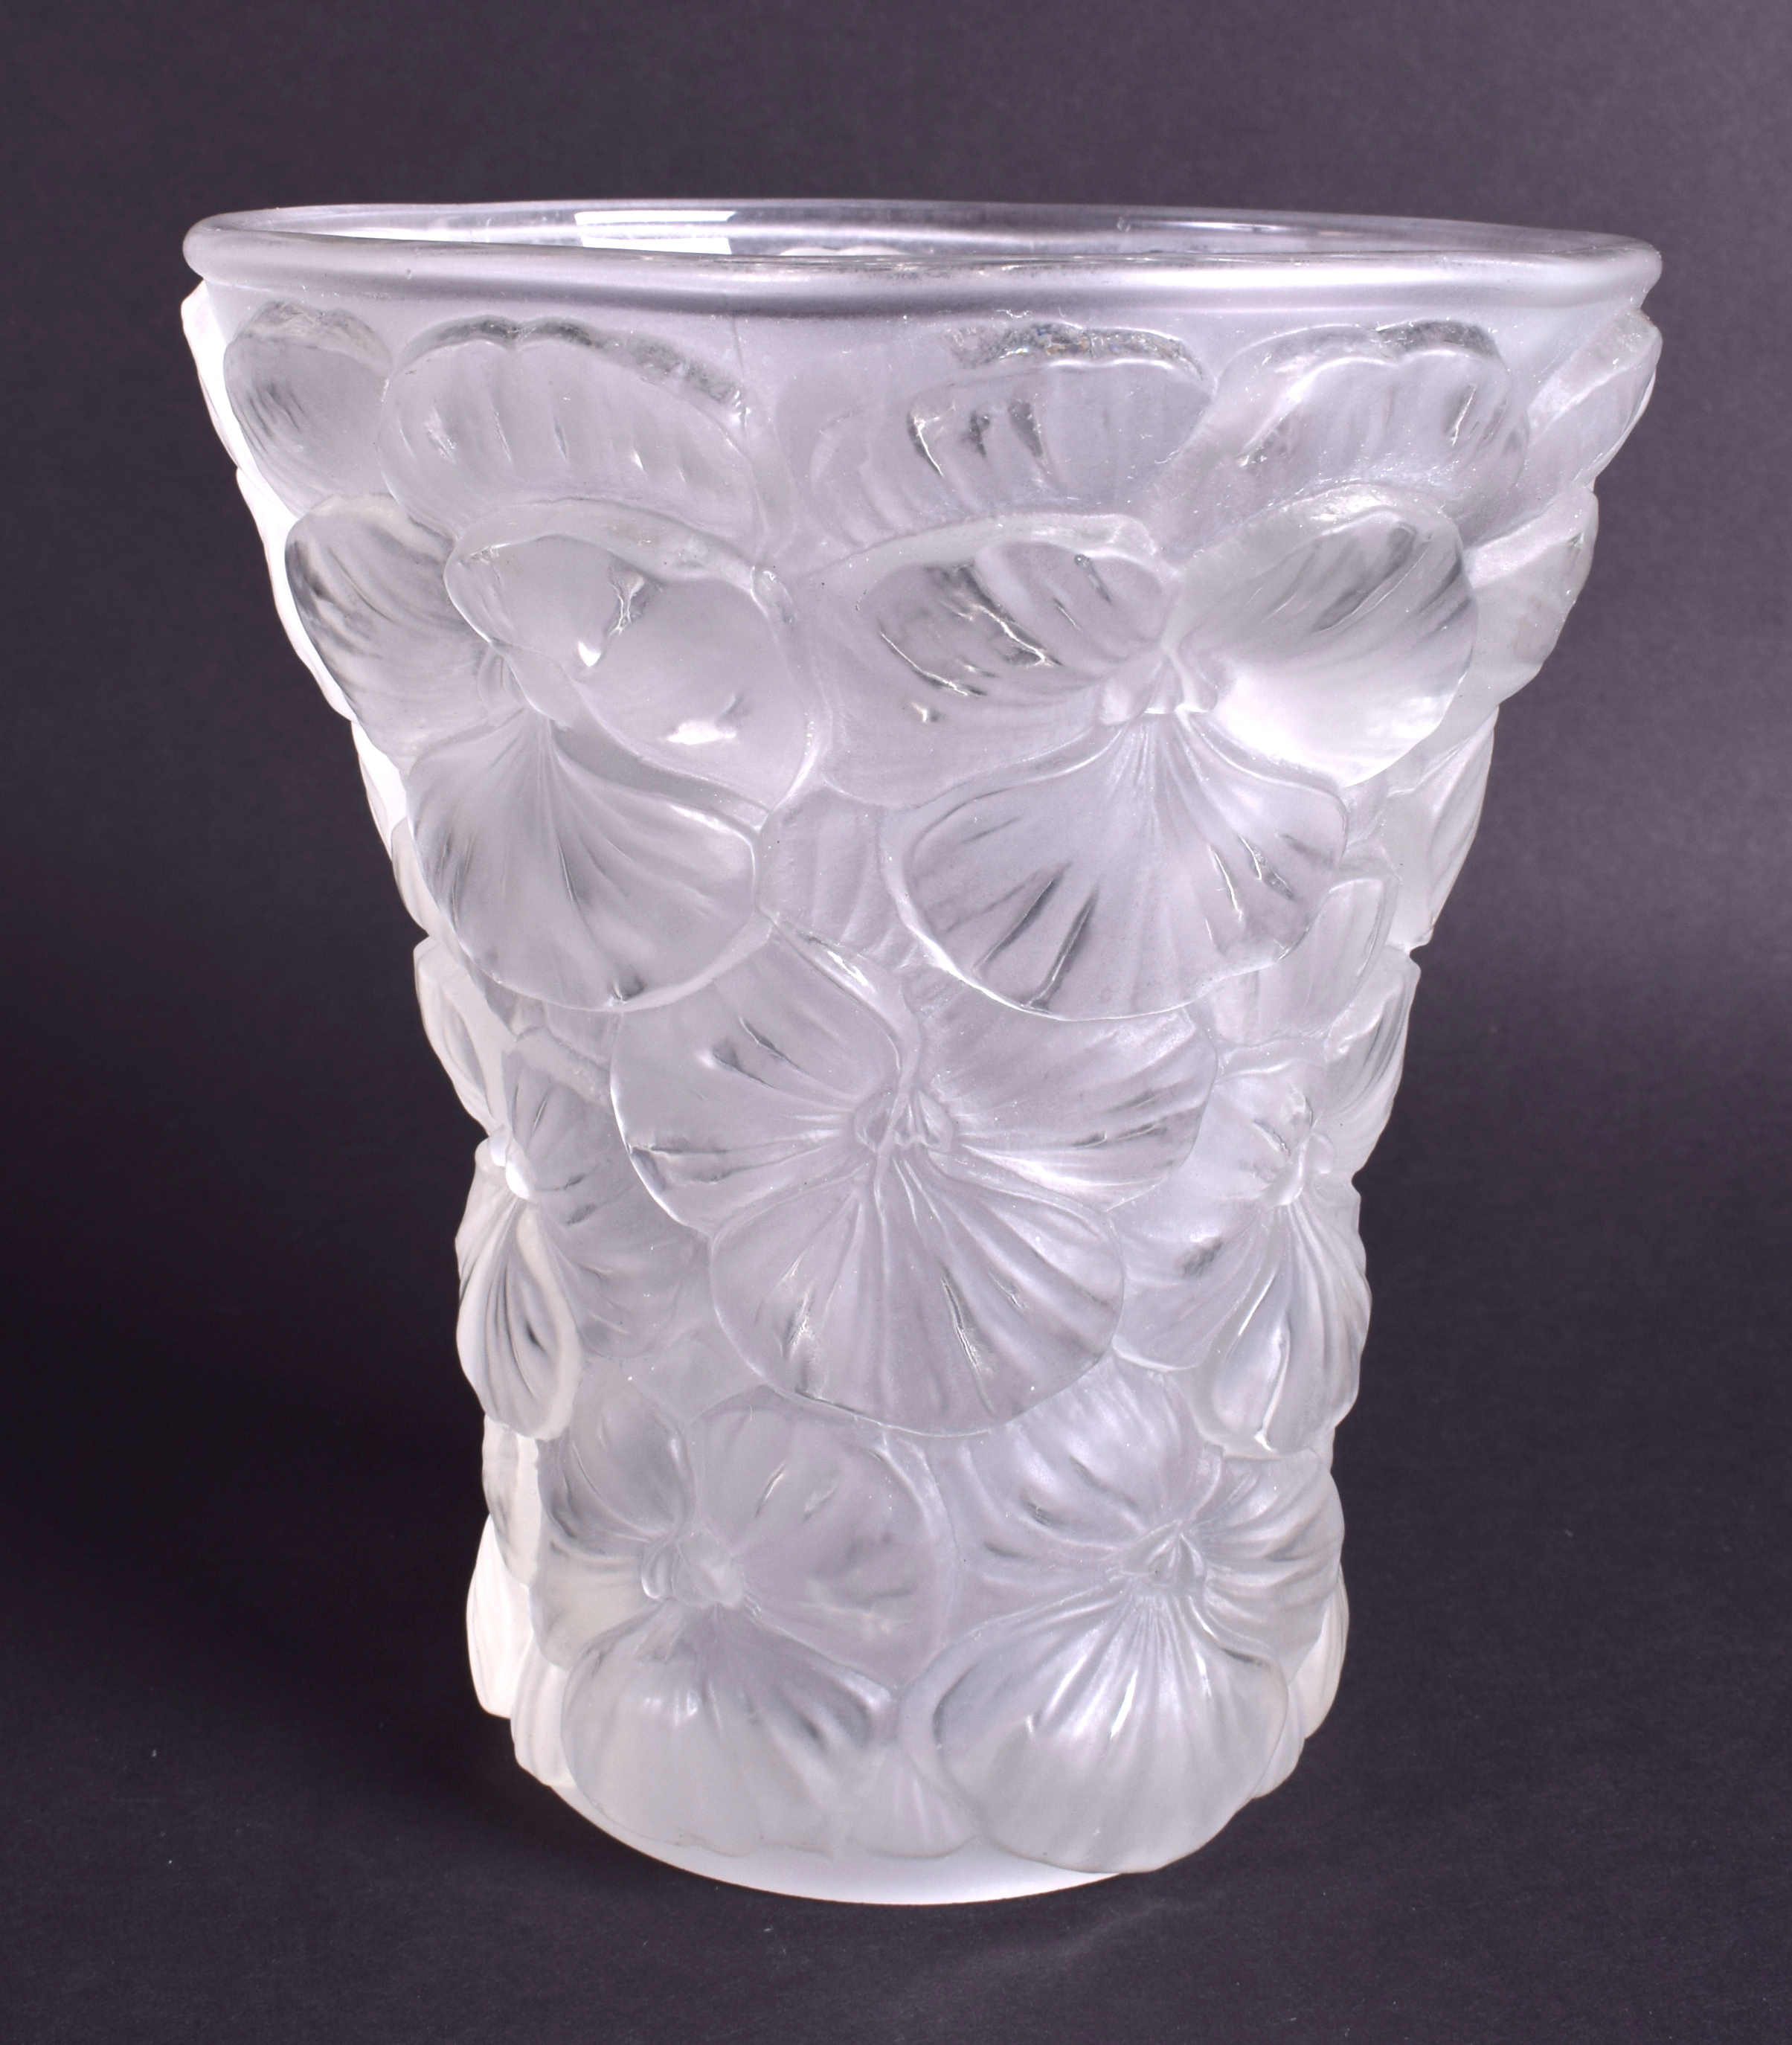 A 1930S JOSEF INWALD BAROLAC GLASS VASE decorated with pansies. 14 cm high.